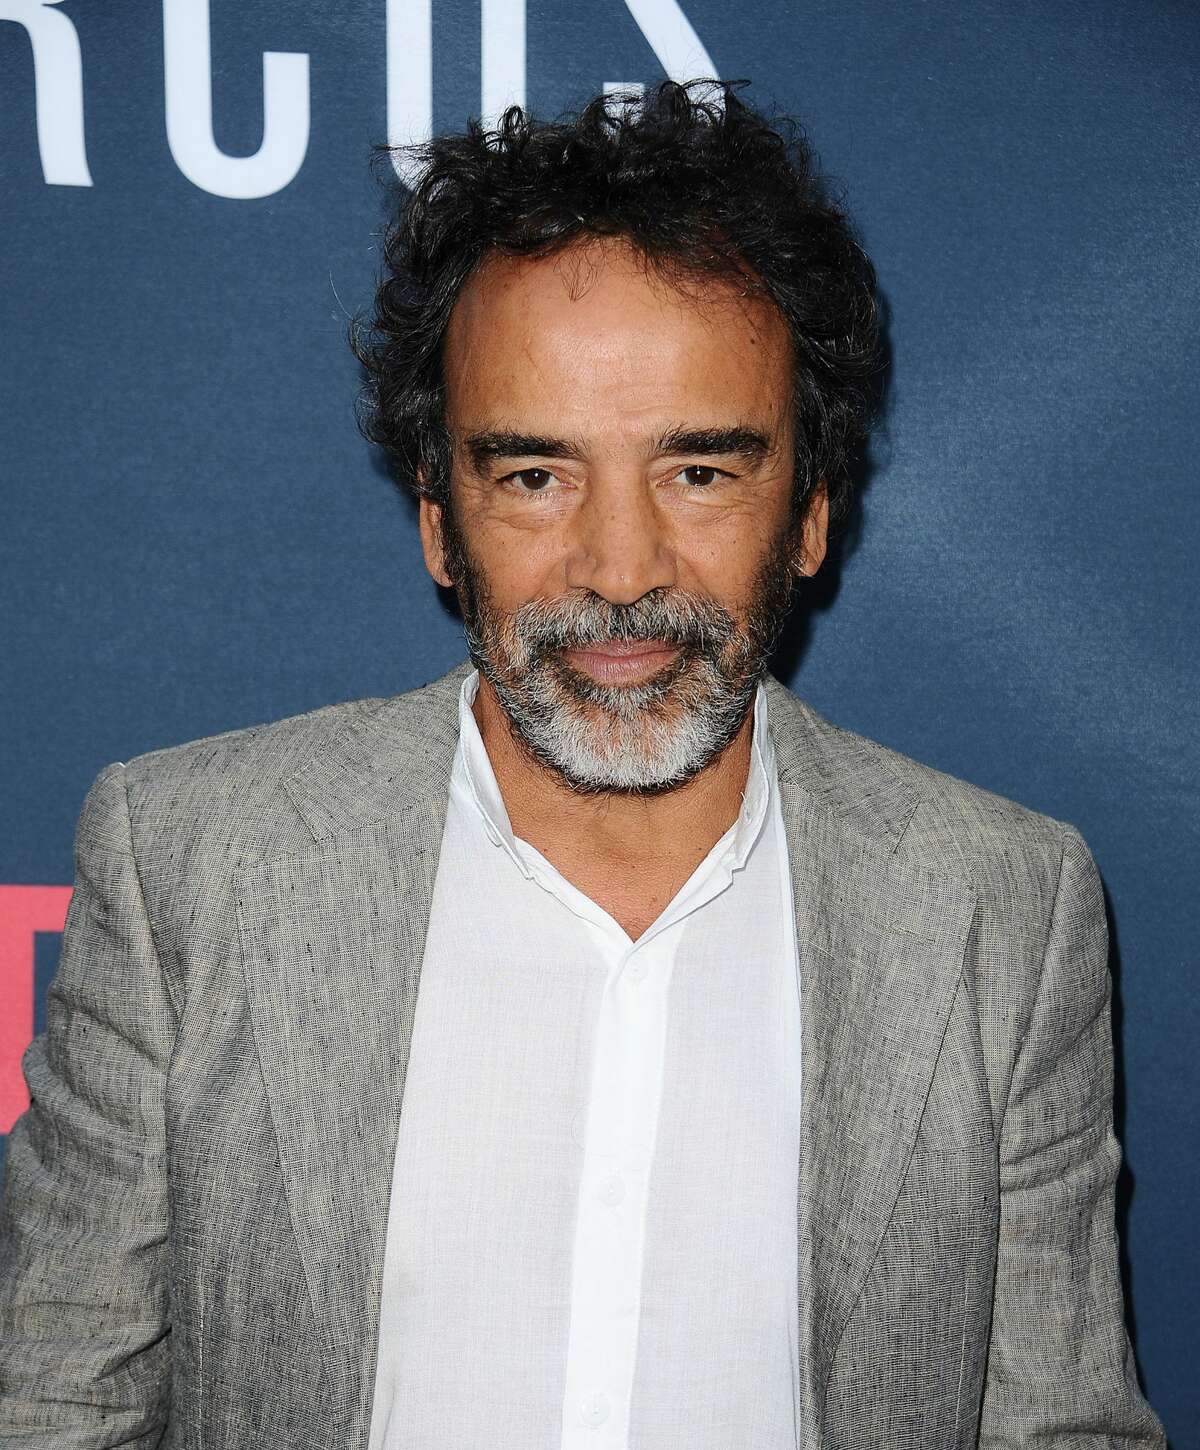 Damian Alcazar - Season 3 Alcazar will play Gilberto Rodriguez Orejuela in season 3 of "Narcos." He is a Mexican actor who is most noted in America for his role in "The Chronicles of Narnia: Prince Caspian" as Lord Sopespian, but he has a large resume of Spanish movies as well.